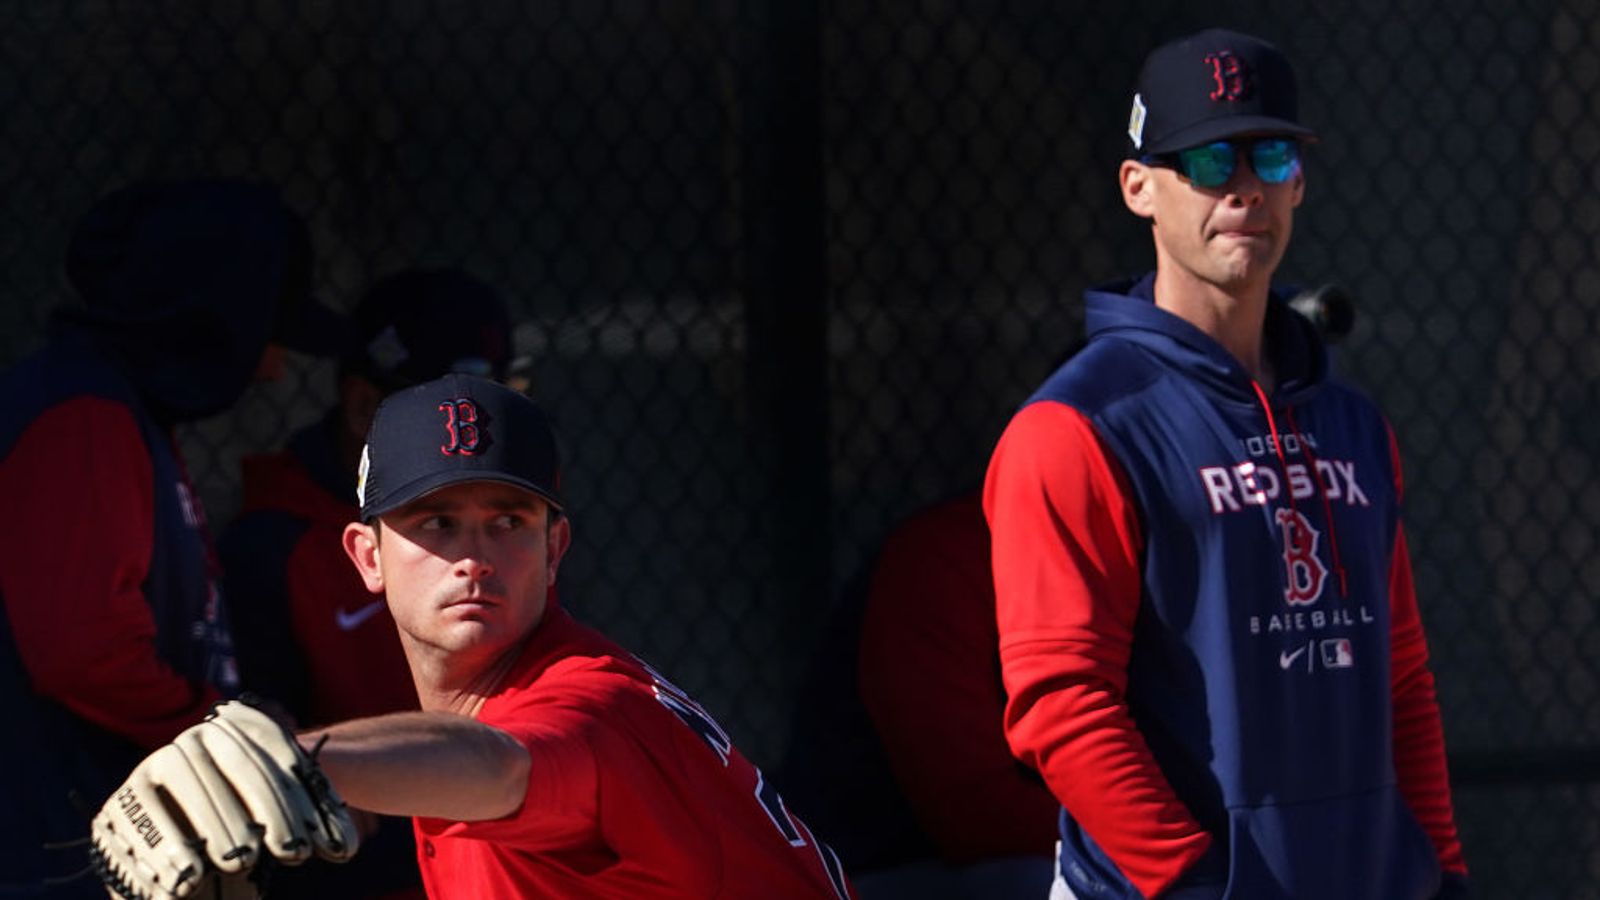 The Red Sox new spring training uniforms are out (and mostly great